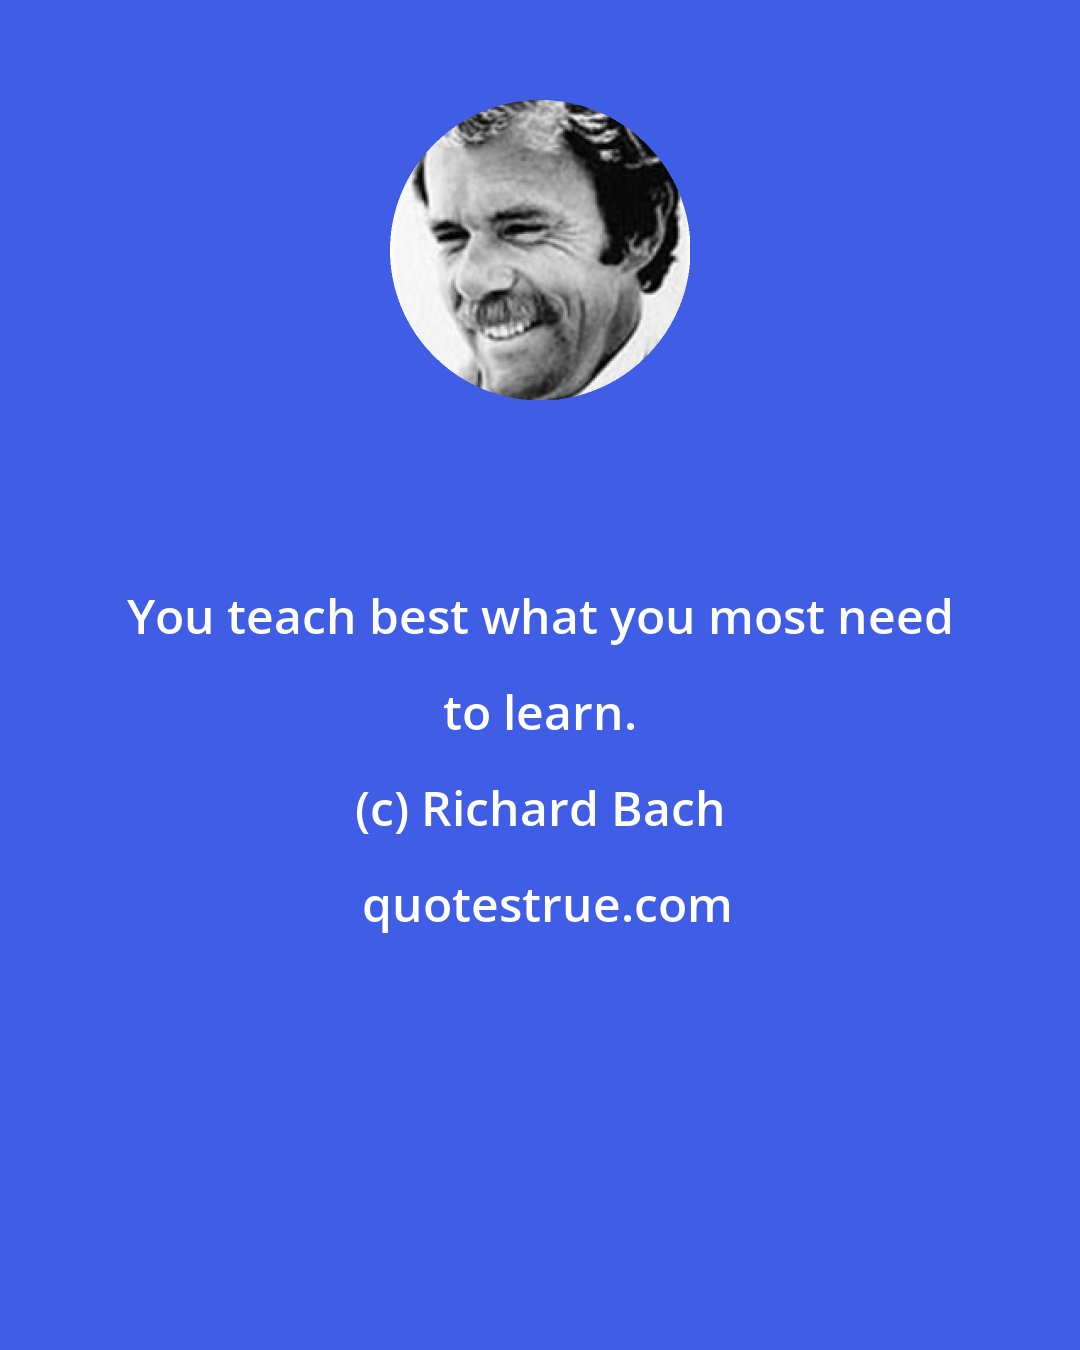 Richard Bach: You teach best what you most need to learn.